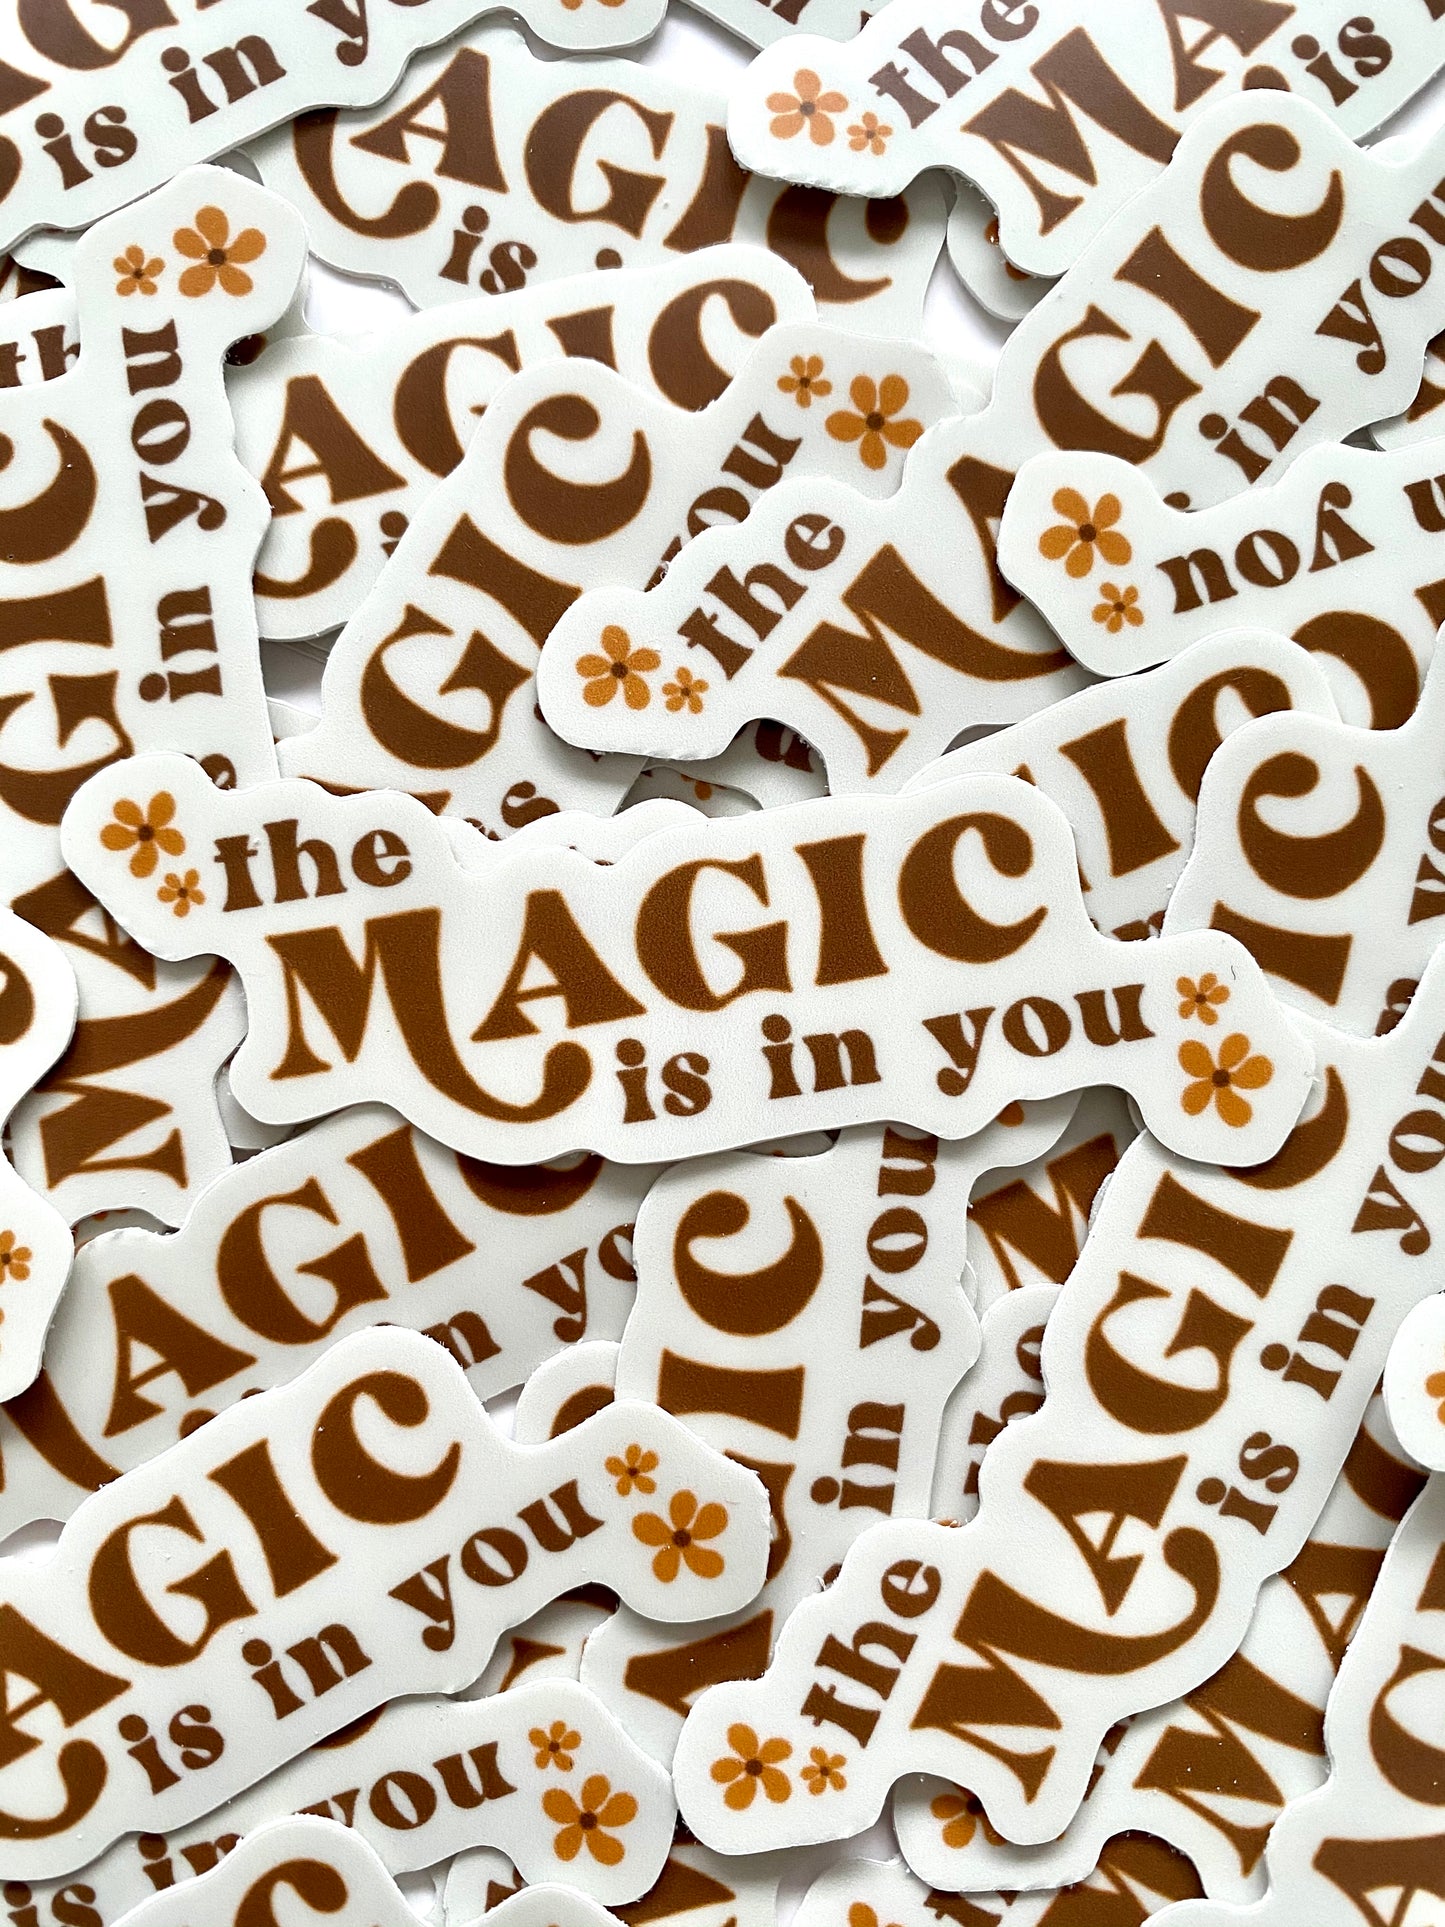 The magic is in you sticker